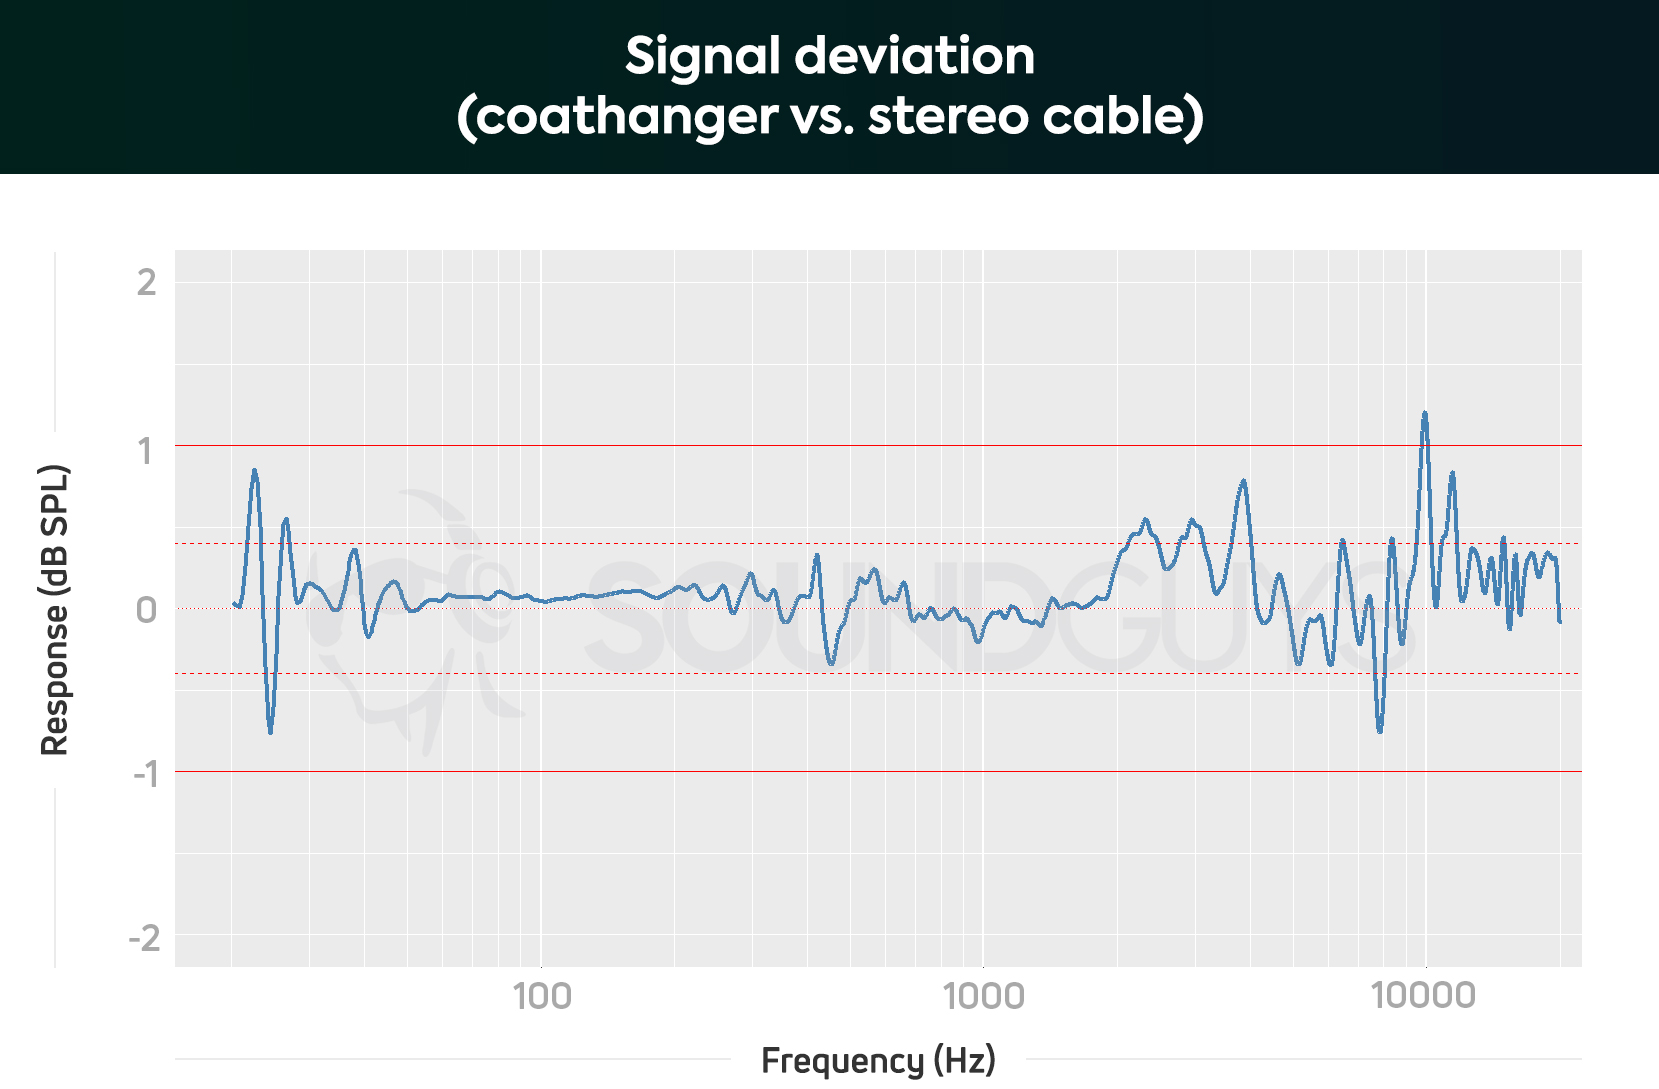 Signal deviation between a coat hanger and stereo cable.